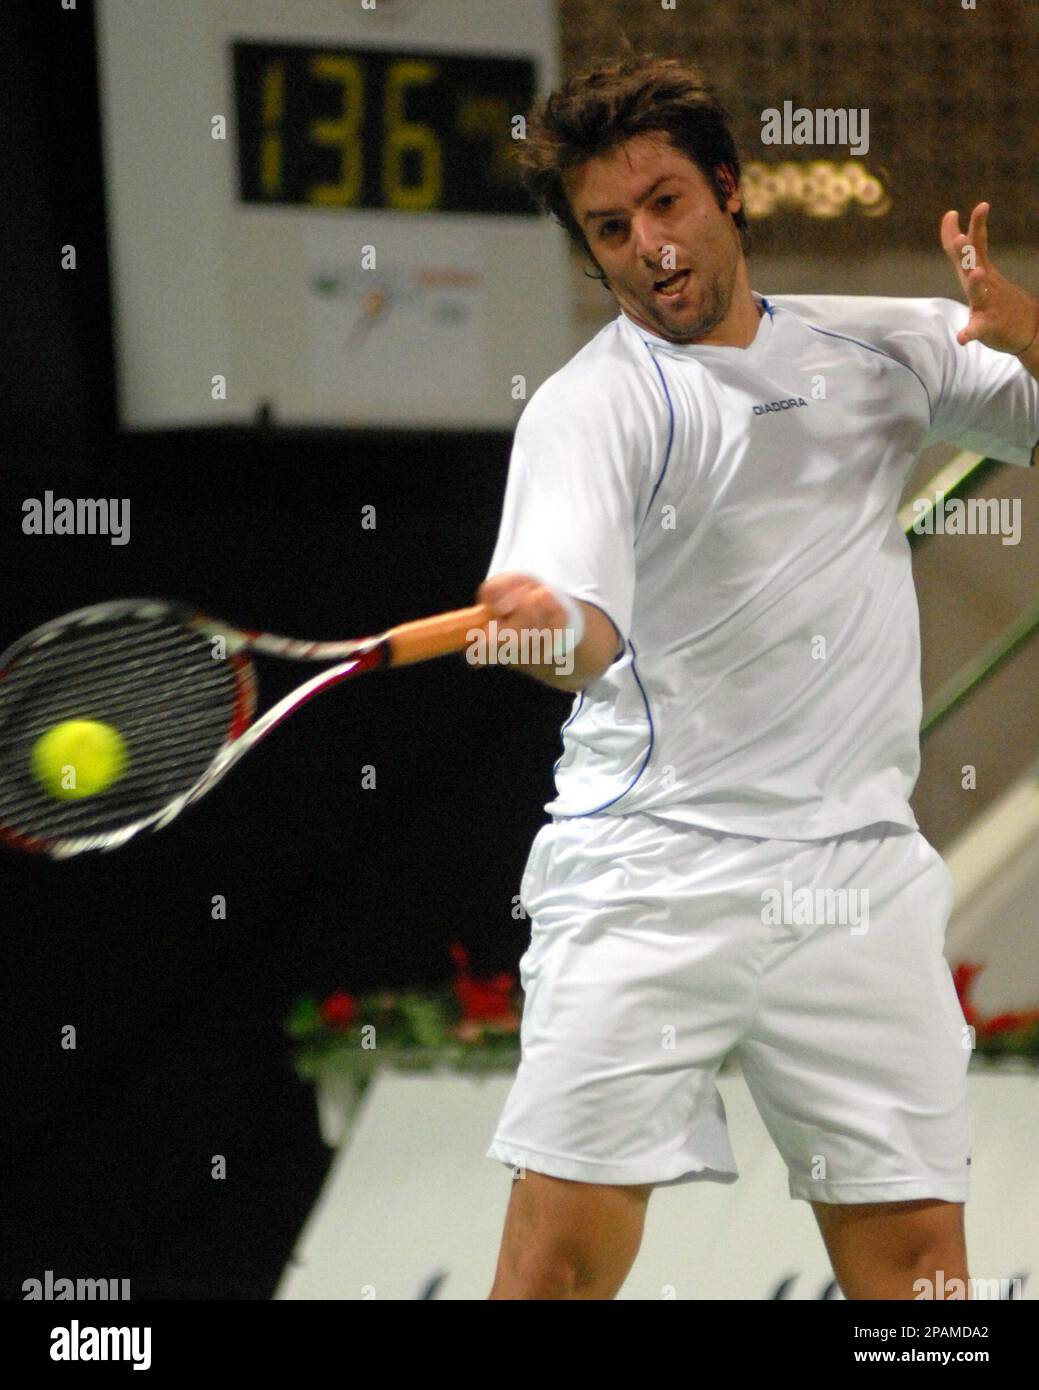 Agustin Calleri of Argentina in action against Tommy Robredo of Spain  during their first round match at the Qatar Open ATP Tour event in Doha on  Tuesday Jan. 1, 2008. (AP Photo/Abul